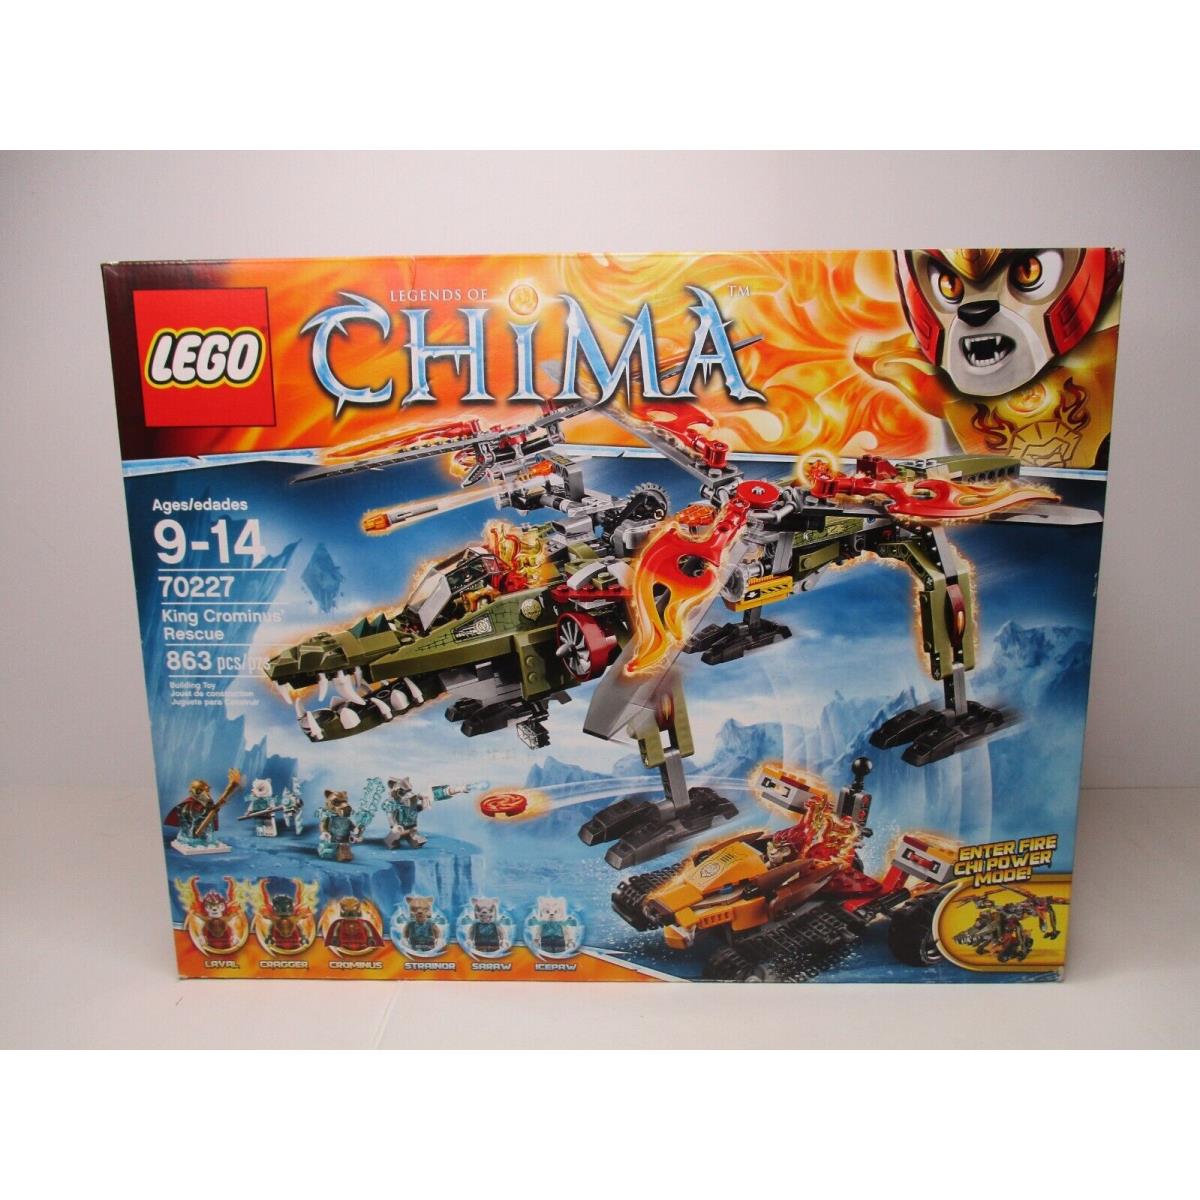 Lego Legends OF Chima King Crominus` Rescue Retired Set 70227 863 Pcs